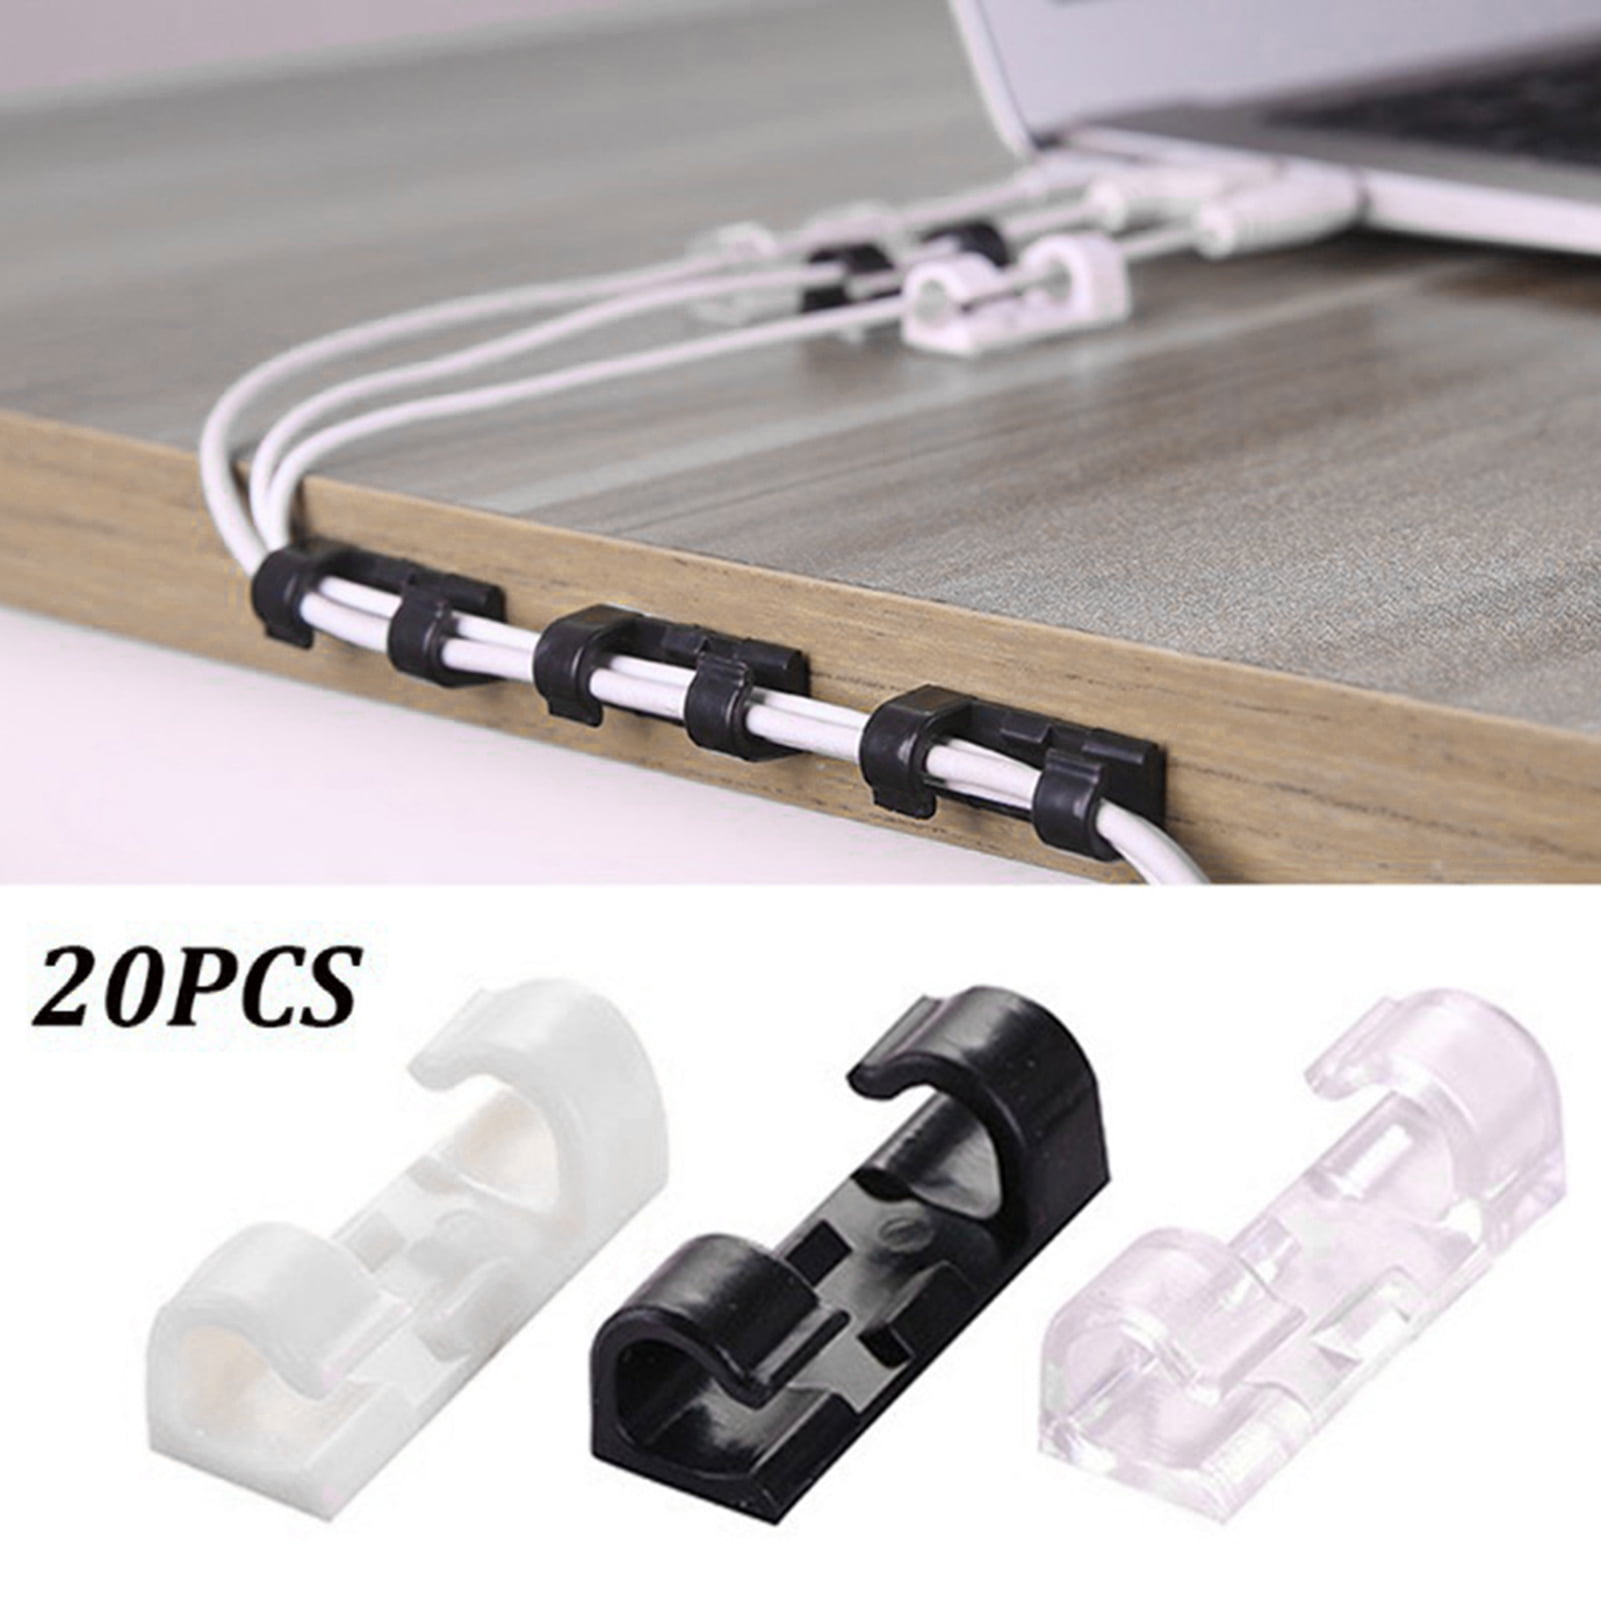 Cable Management Clip – Herman Miller Store